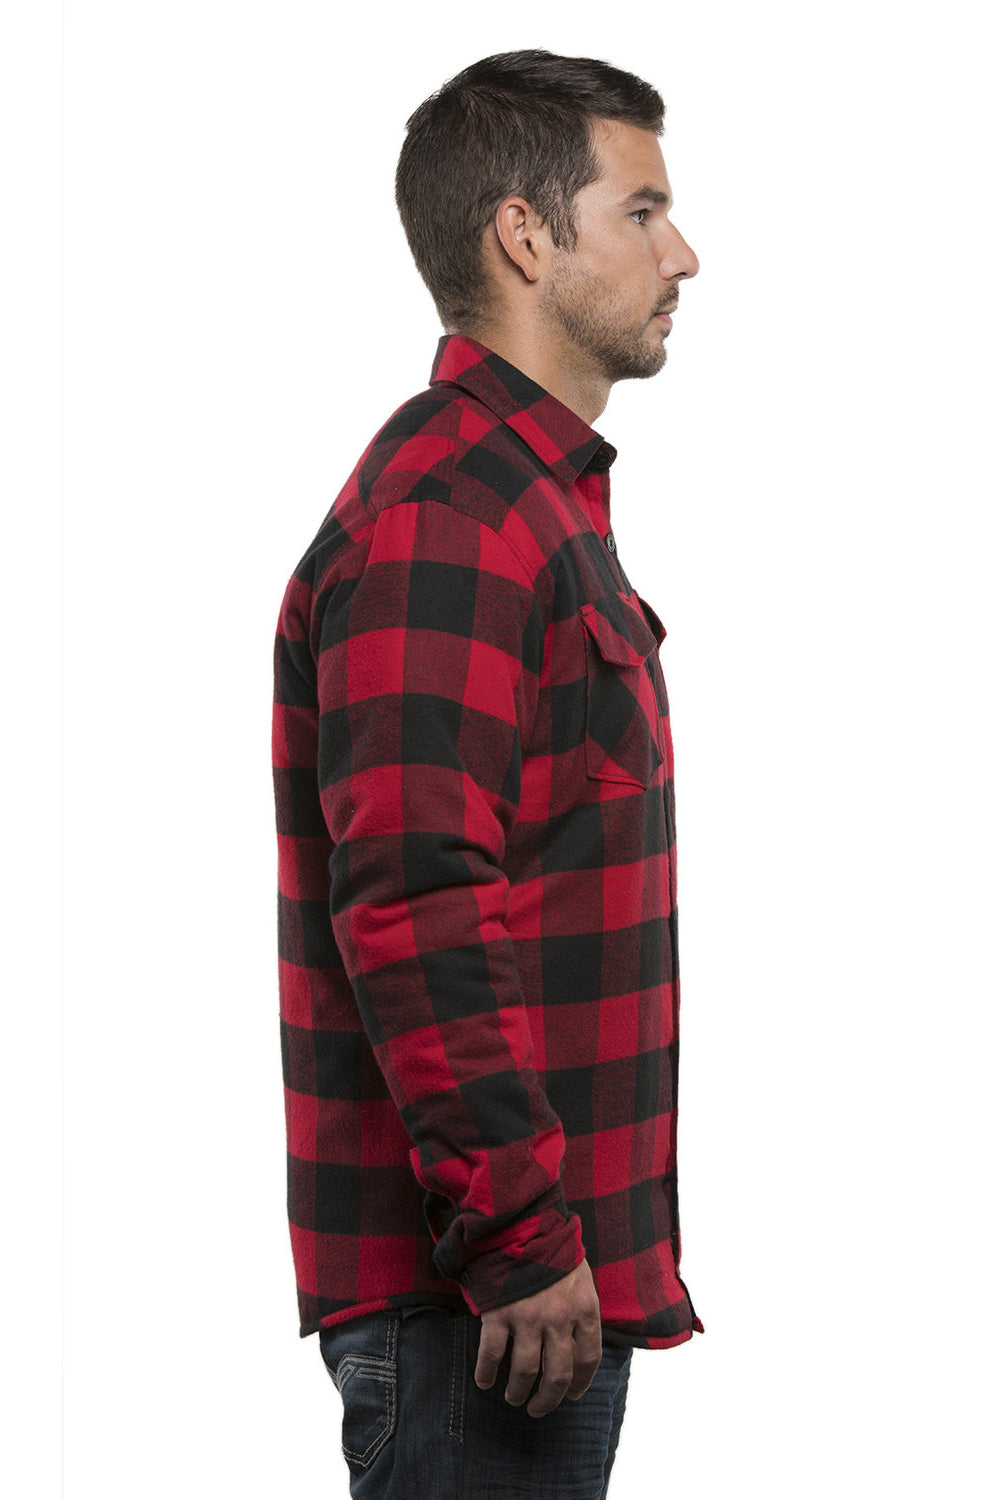 Burnside 8610 Mens Quilted Flannel Button Down Shirt Jacket Red/Black Buffalo Model Side